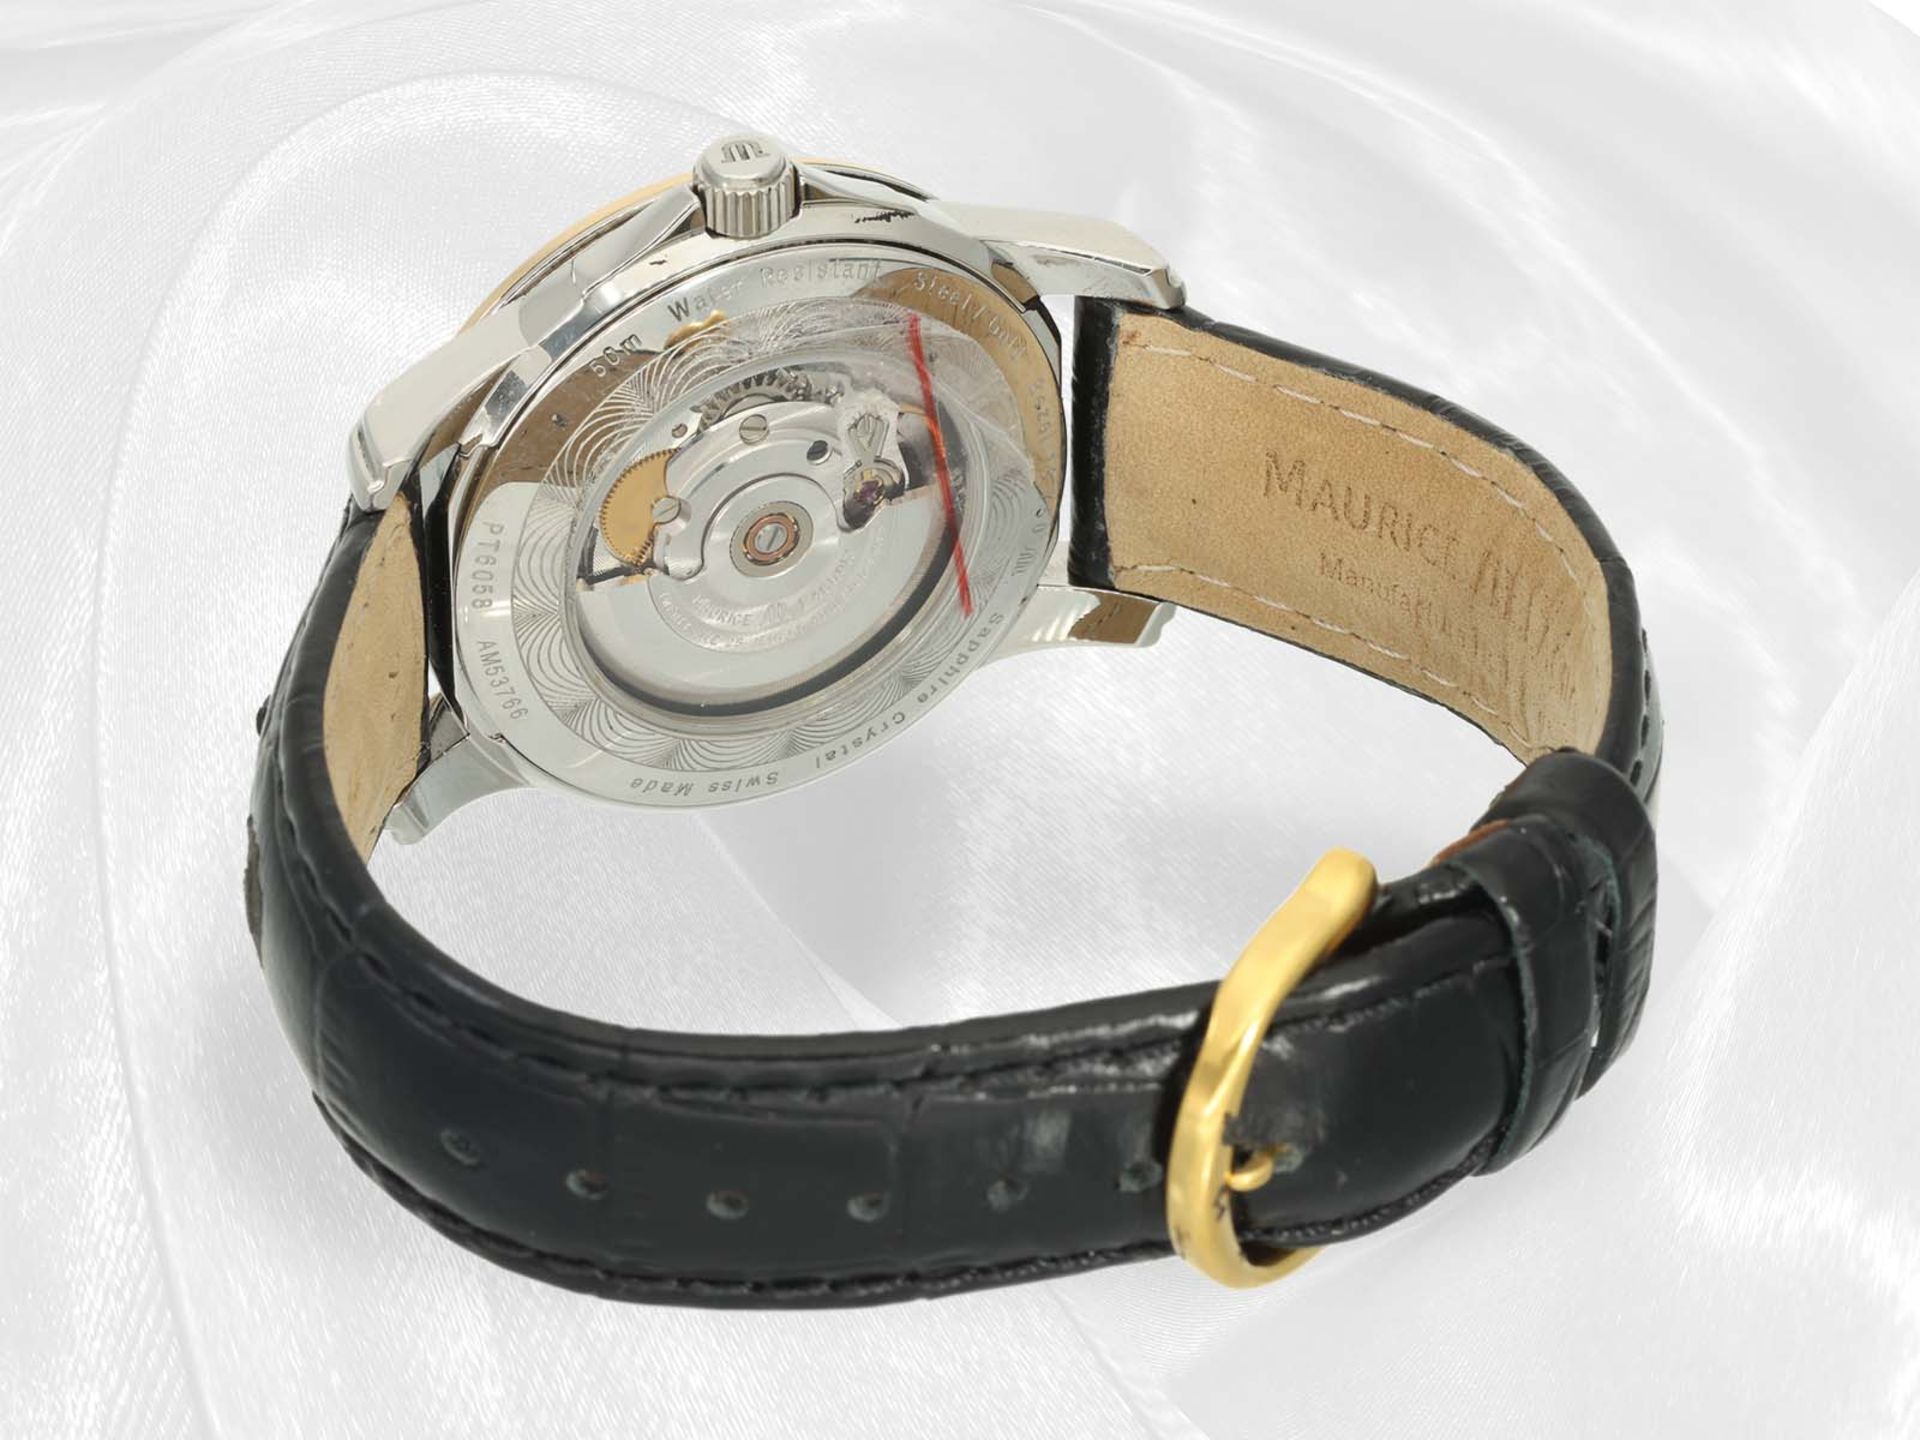 Large automatic men's wristwatch by Maurice Lacroix, Day-Date, Ref: PT 6085 - Image 5 of 5